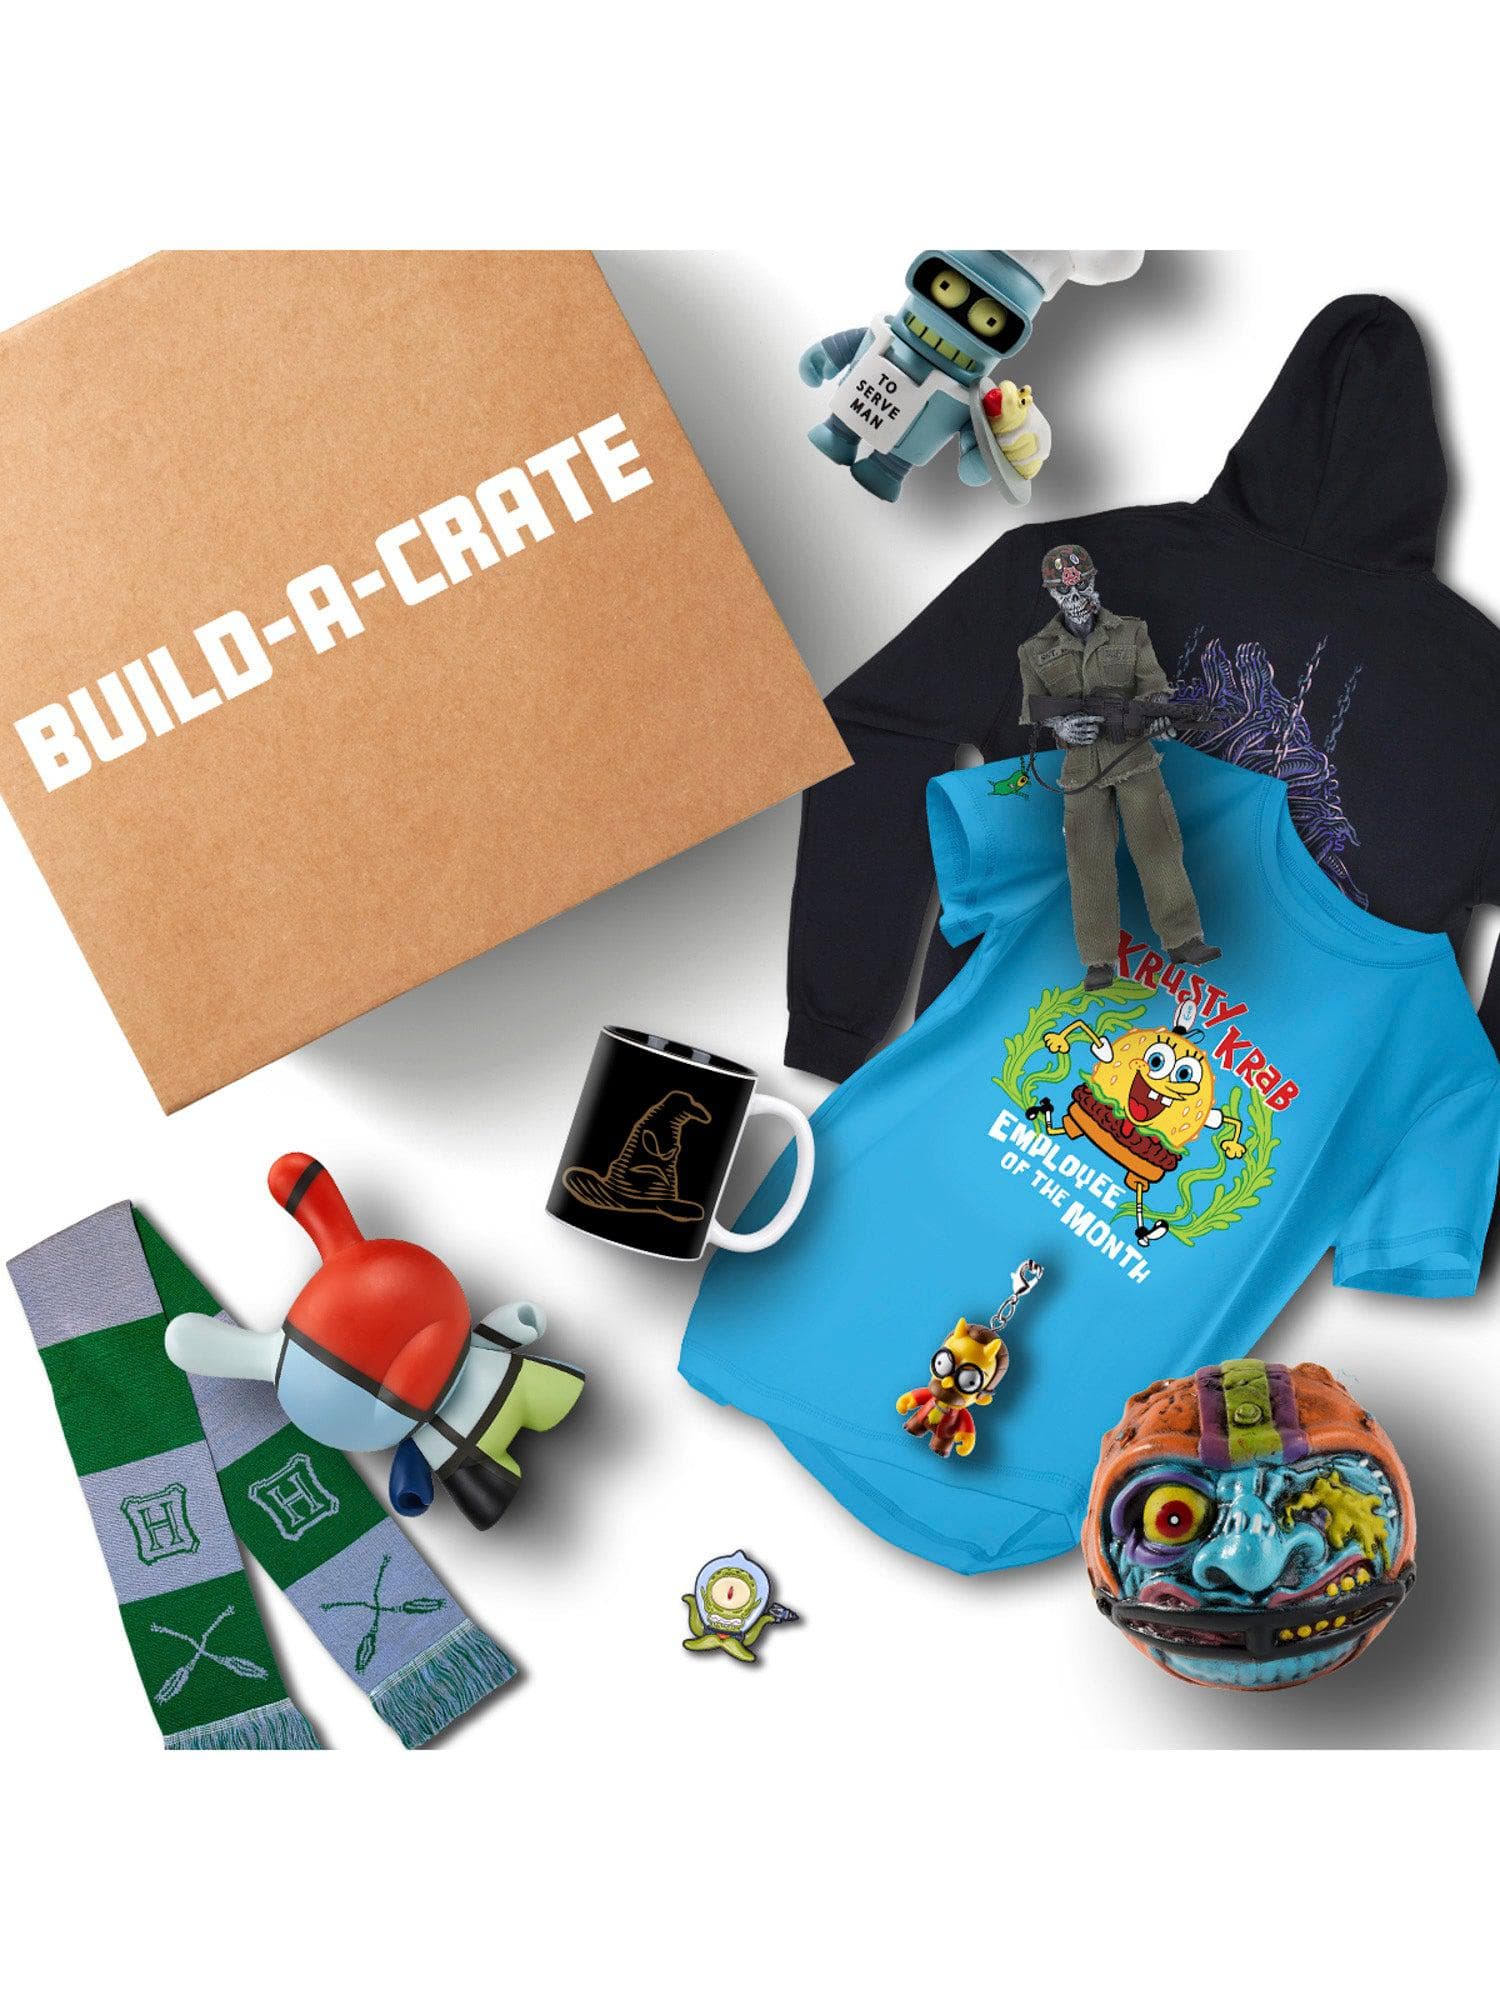 Build-A-Crate - 10 Items | Custom Collectibles Crate